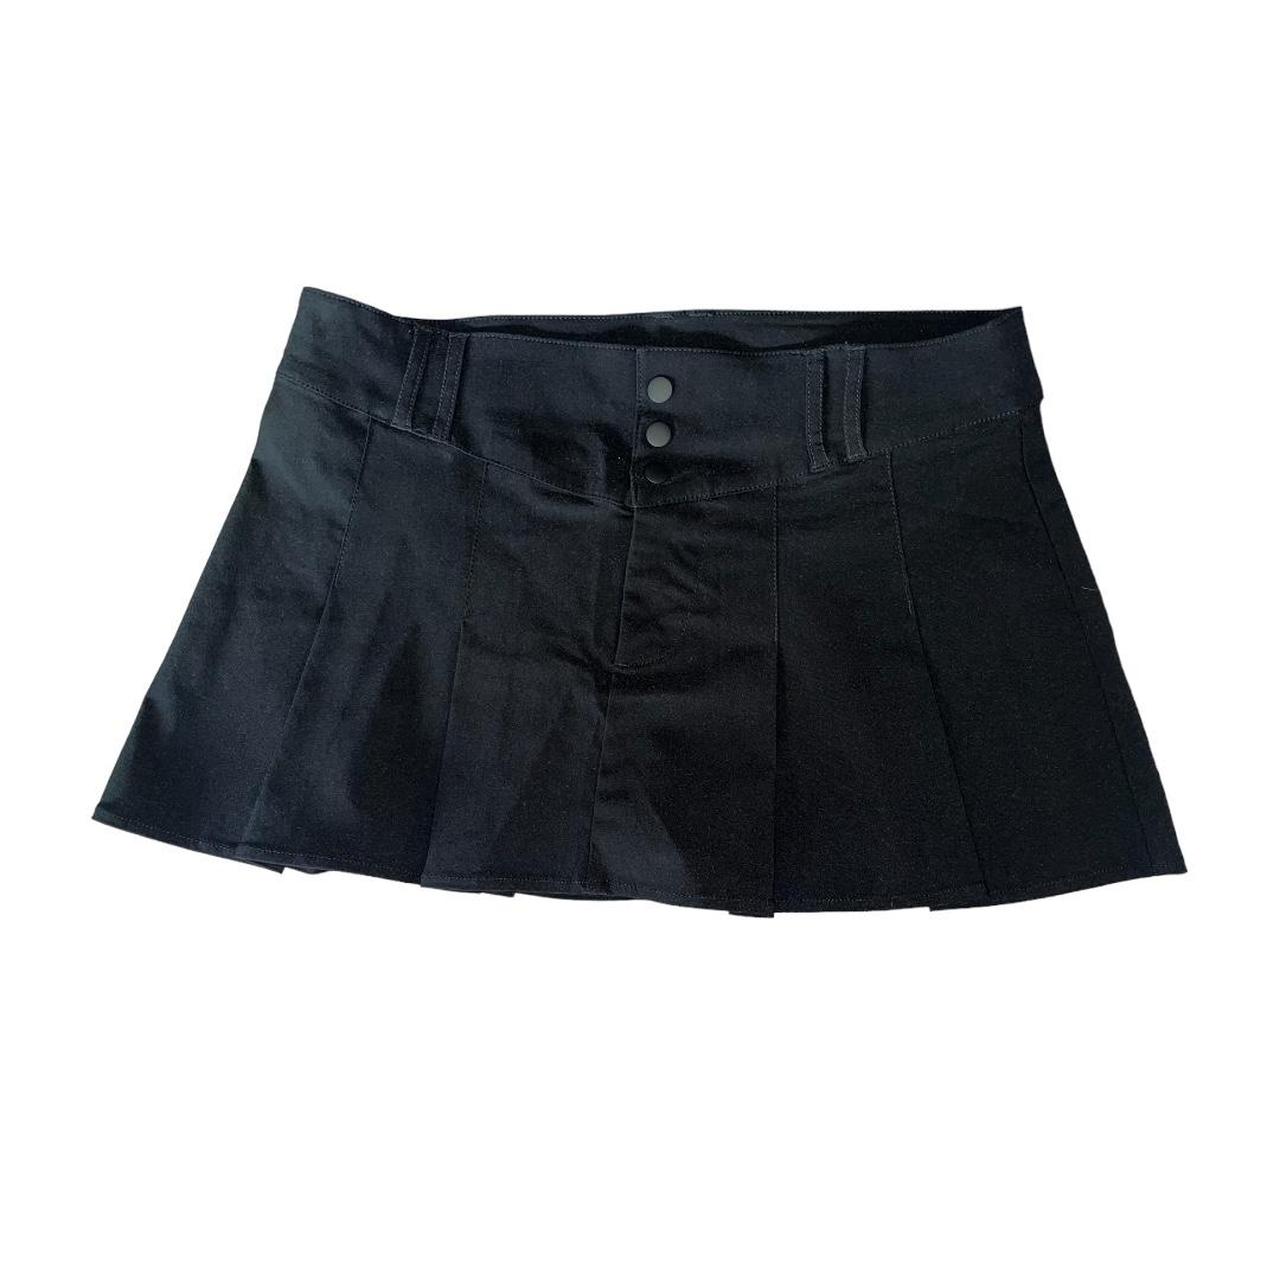 Pleated black short skirt. Belt loops. Button and... - Depop